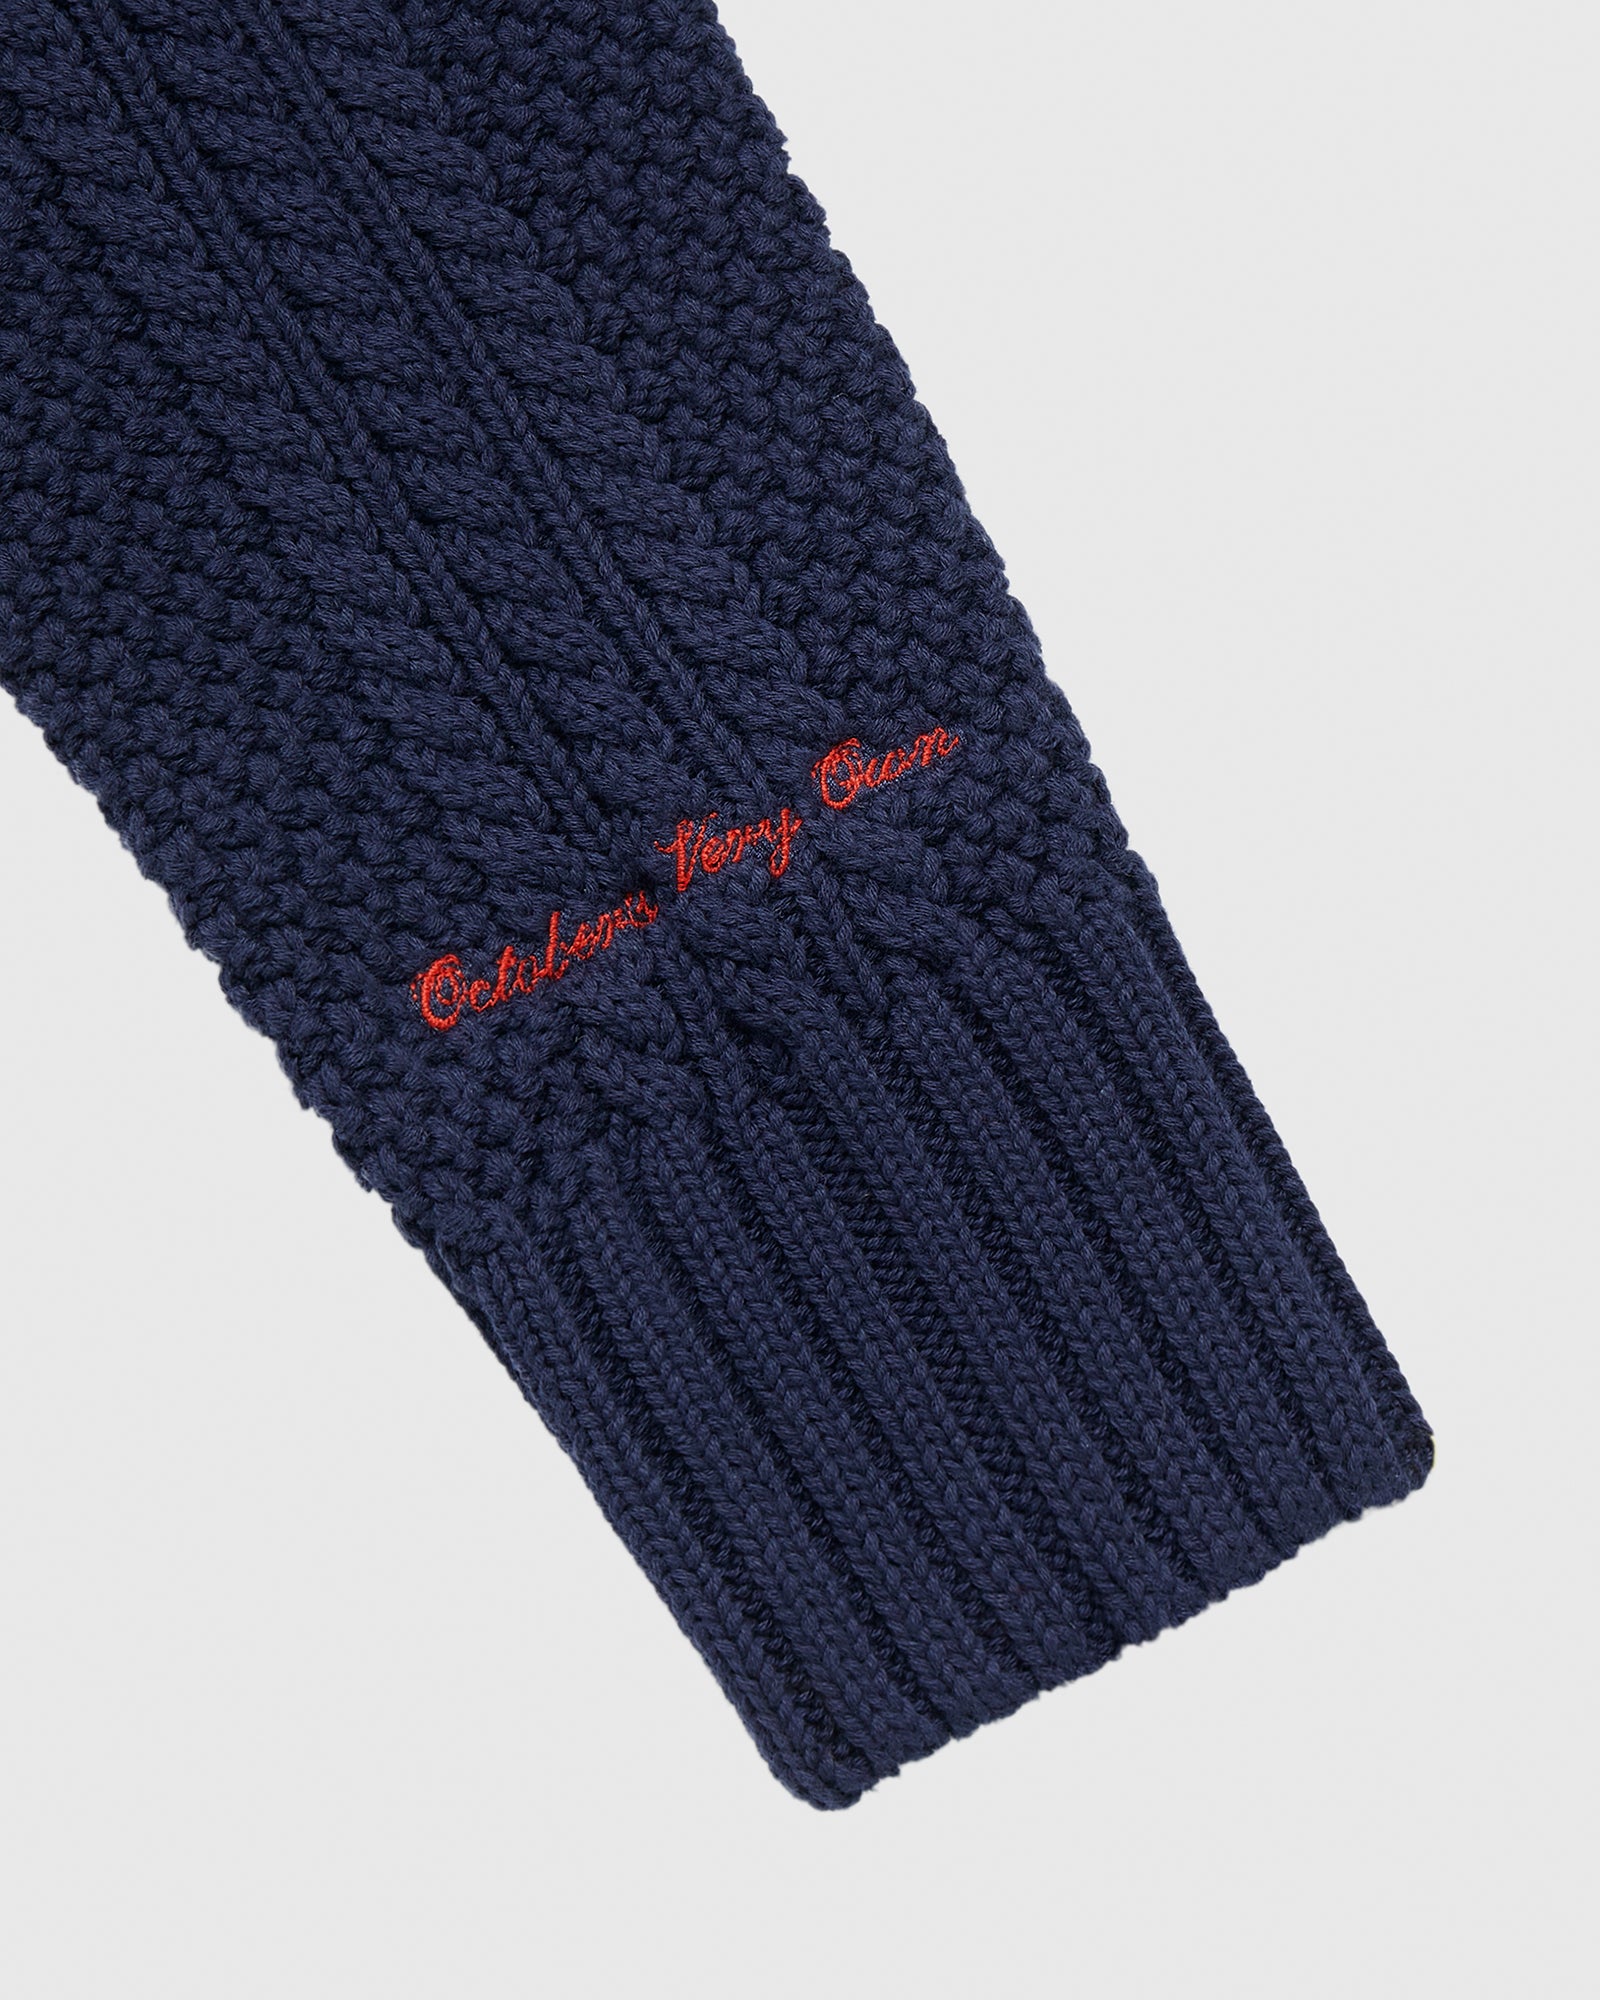 Cable Knit Turtleneck Sweater - Navy - October's Very Own